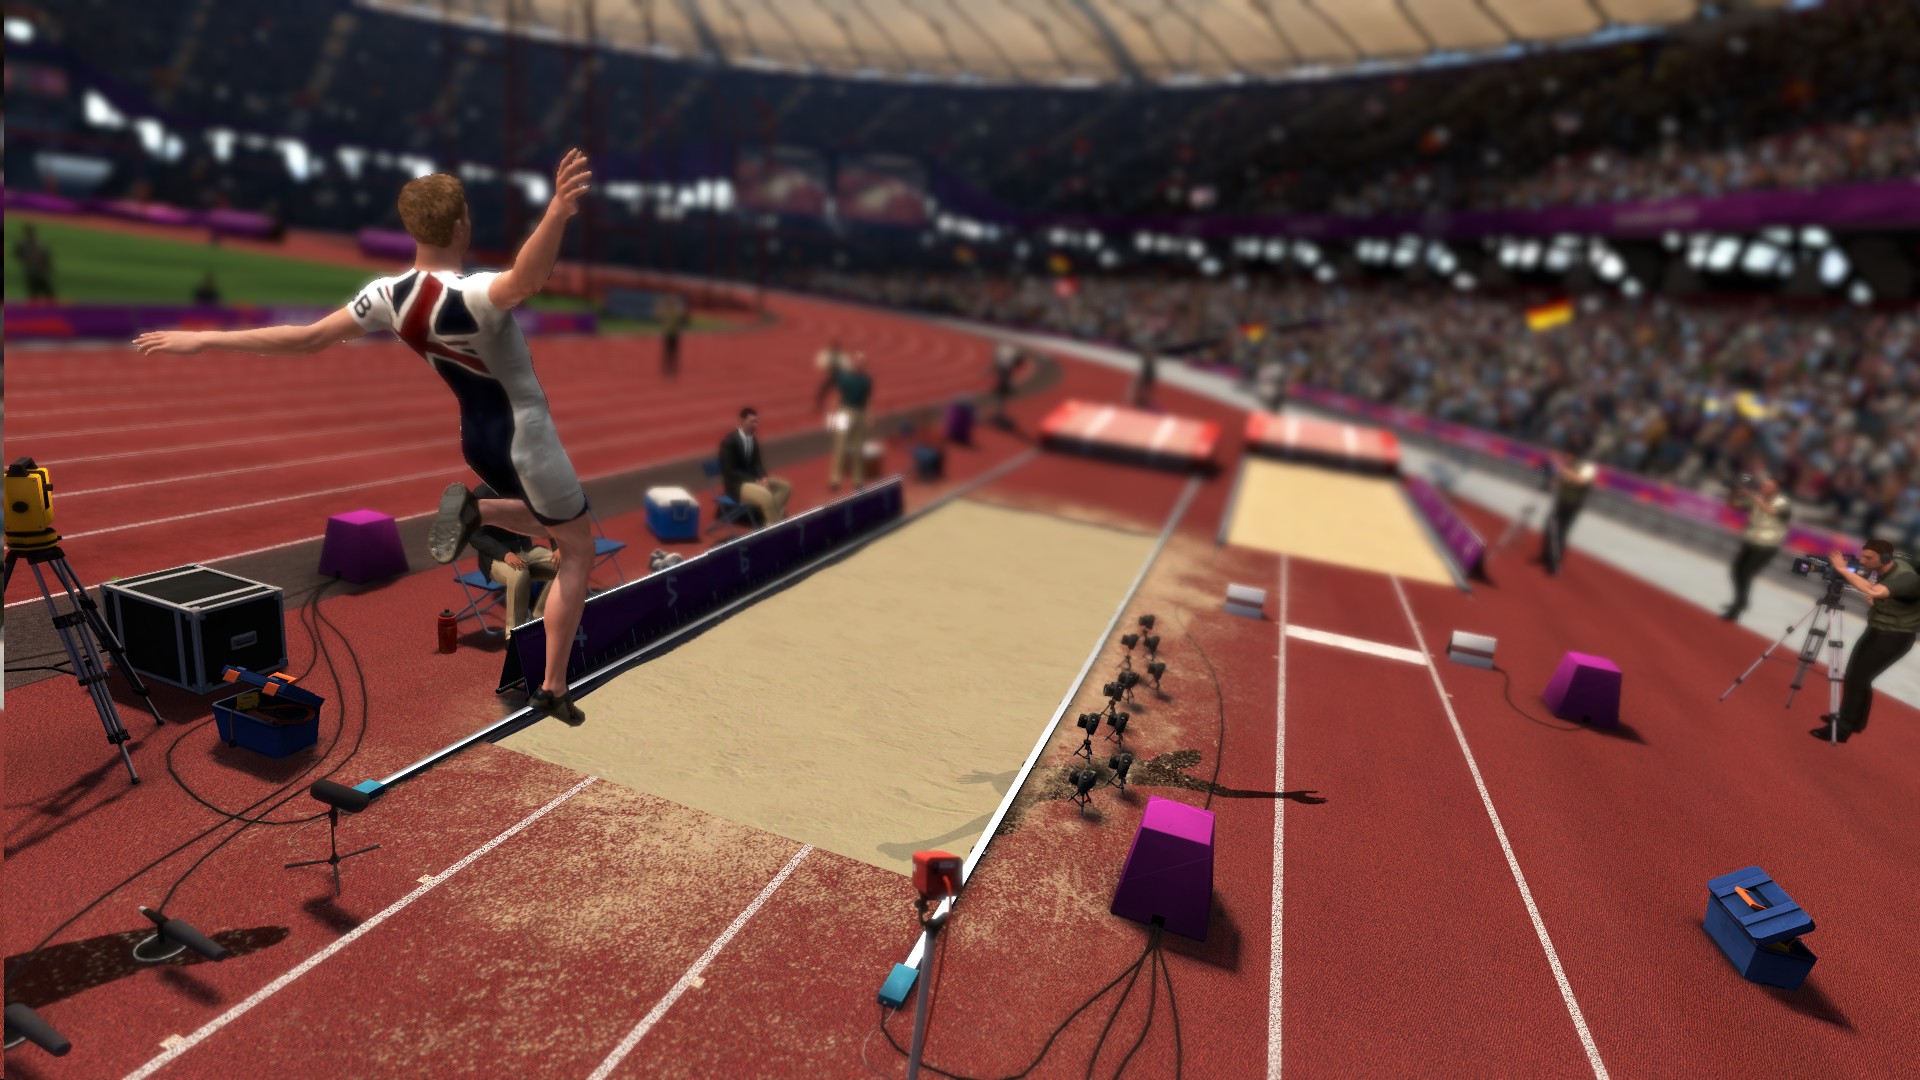 Games videos download. London 2012. London 2012 Olympic games игра. London 2012 ps3. London 2012 (Video game).